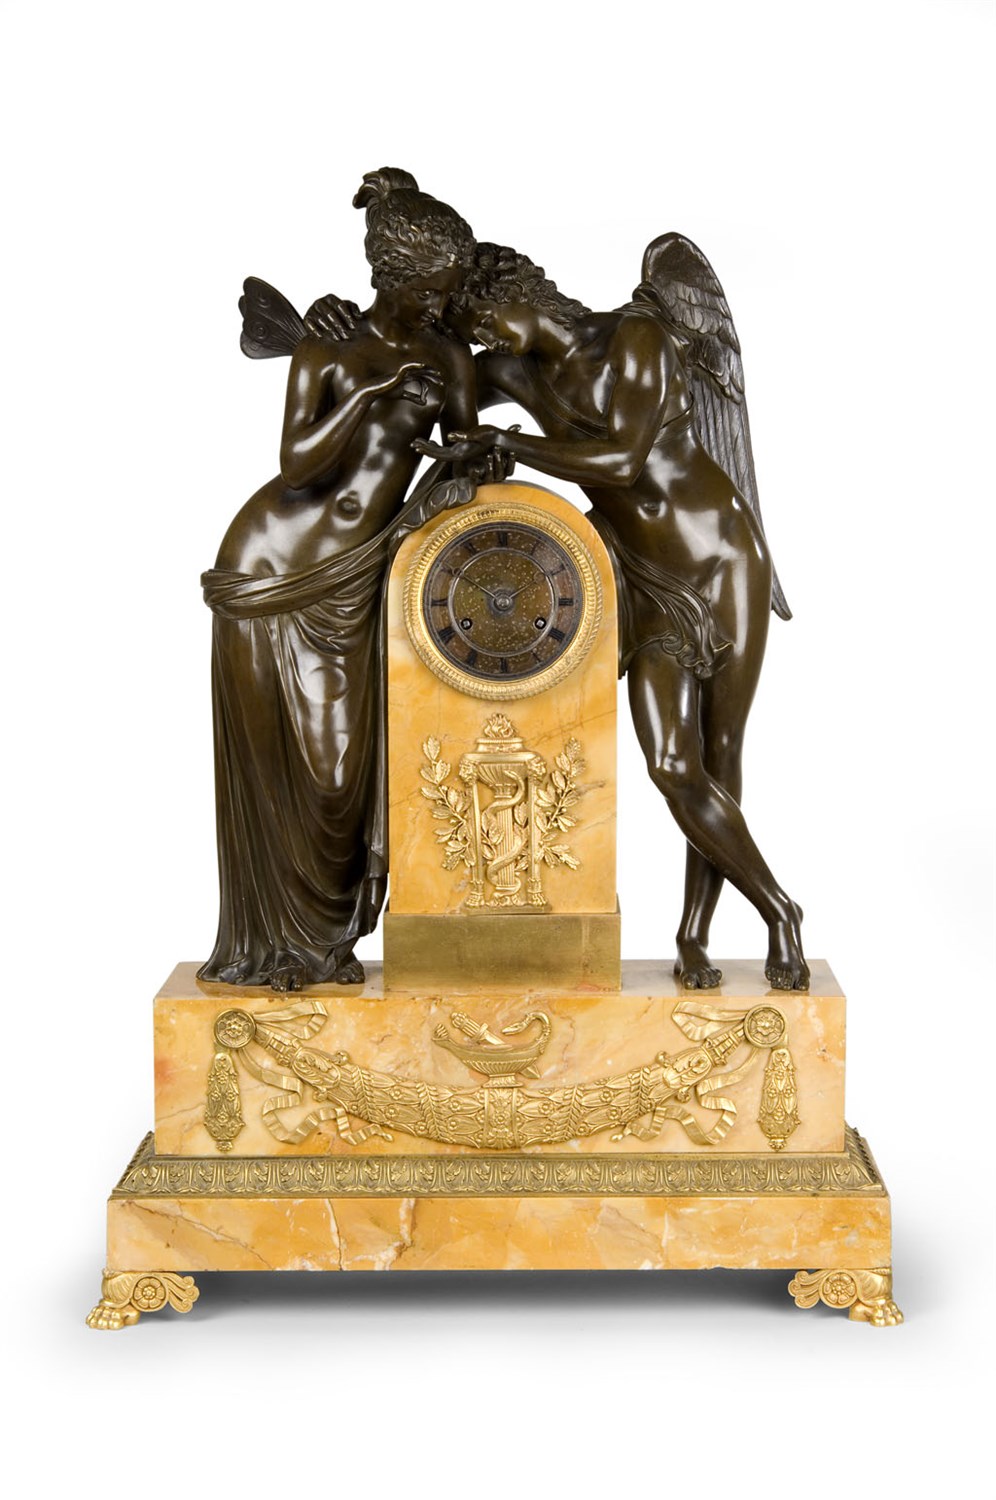 Lot 456 - A large French Siena marble and parcel-gilt-bronze mantel clock, in Empire style, circa 1850